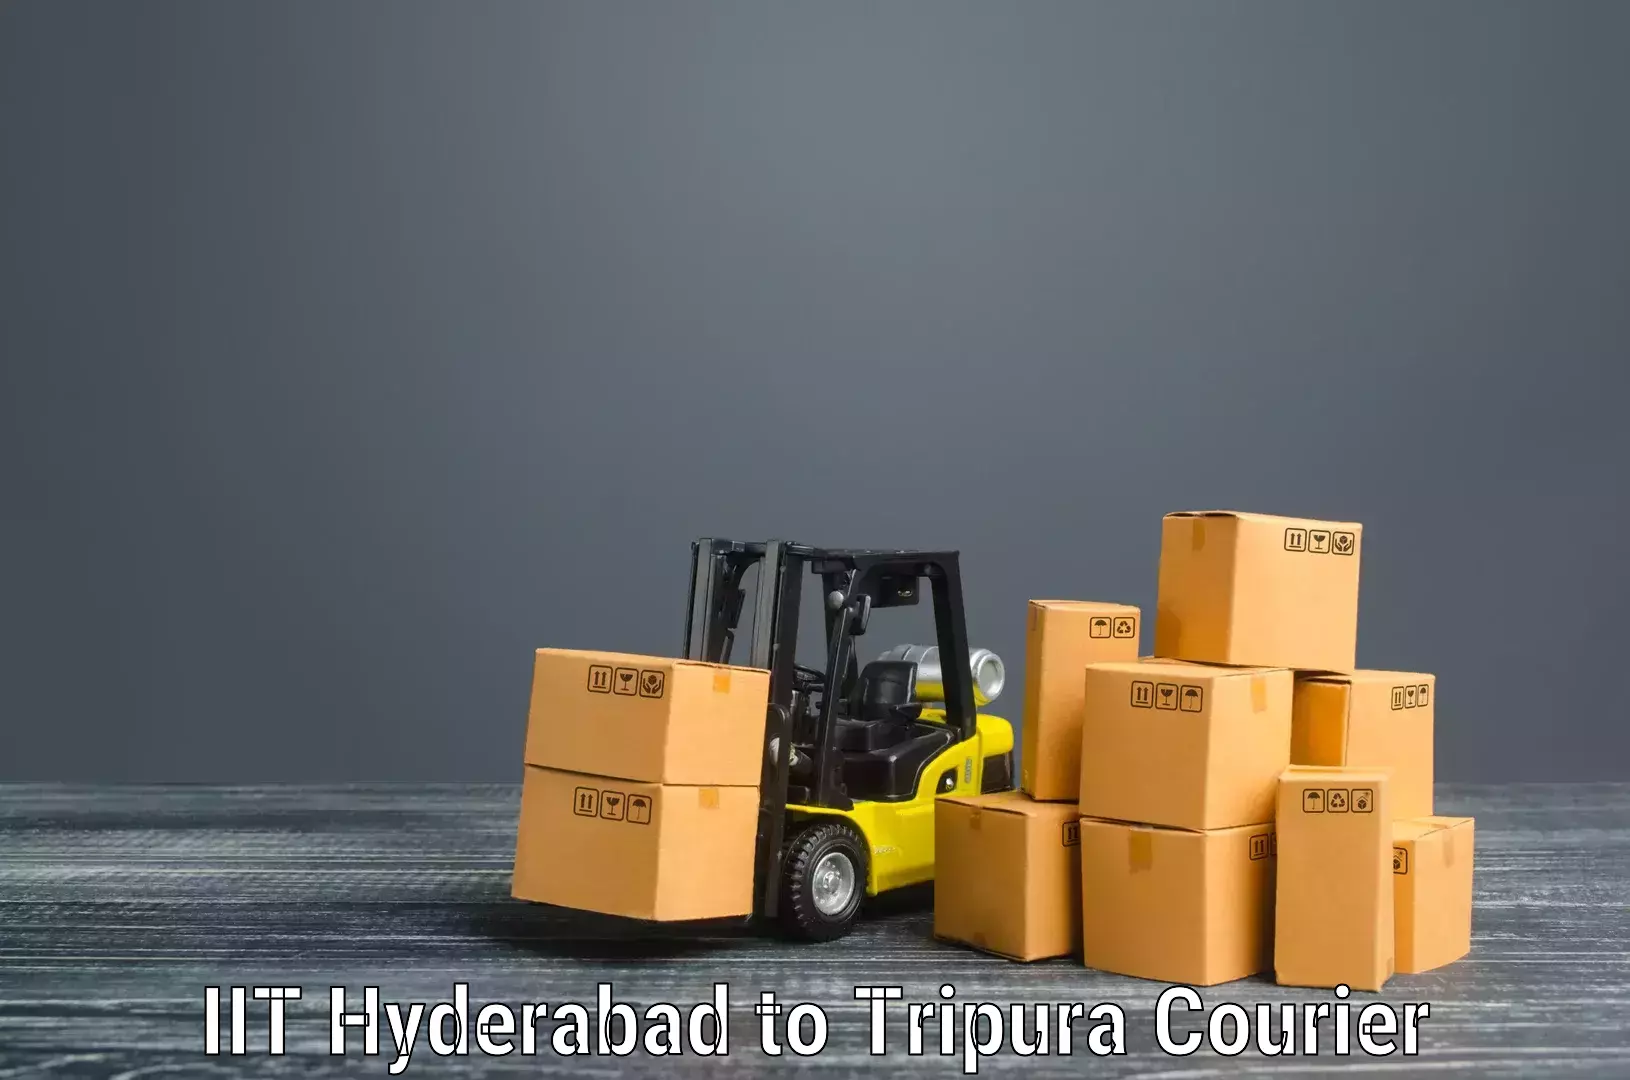 Trusted moving company IIT Hyderabad to Tripura